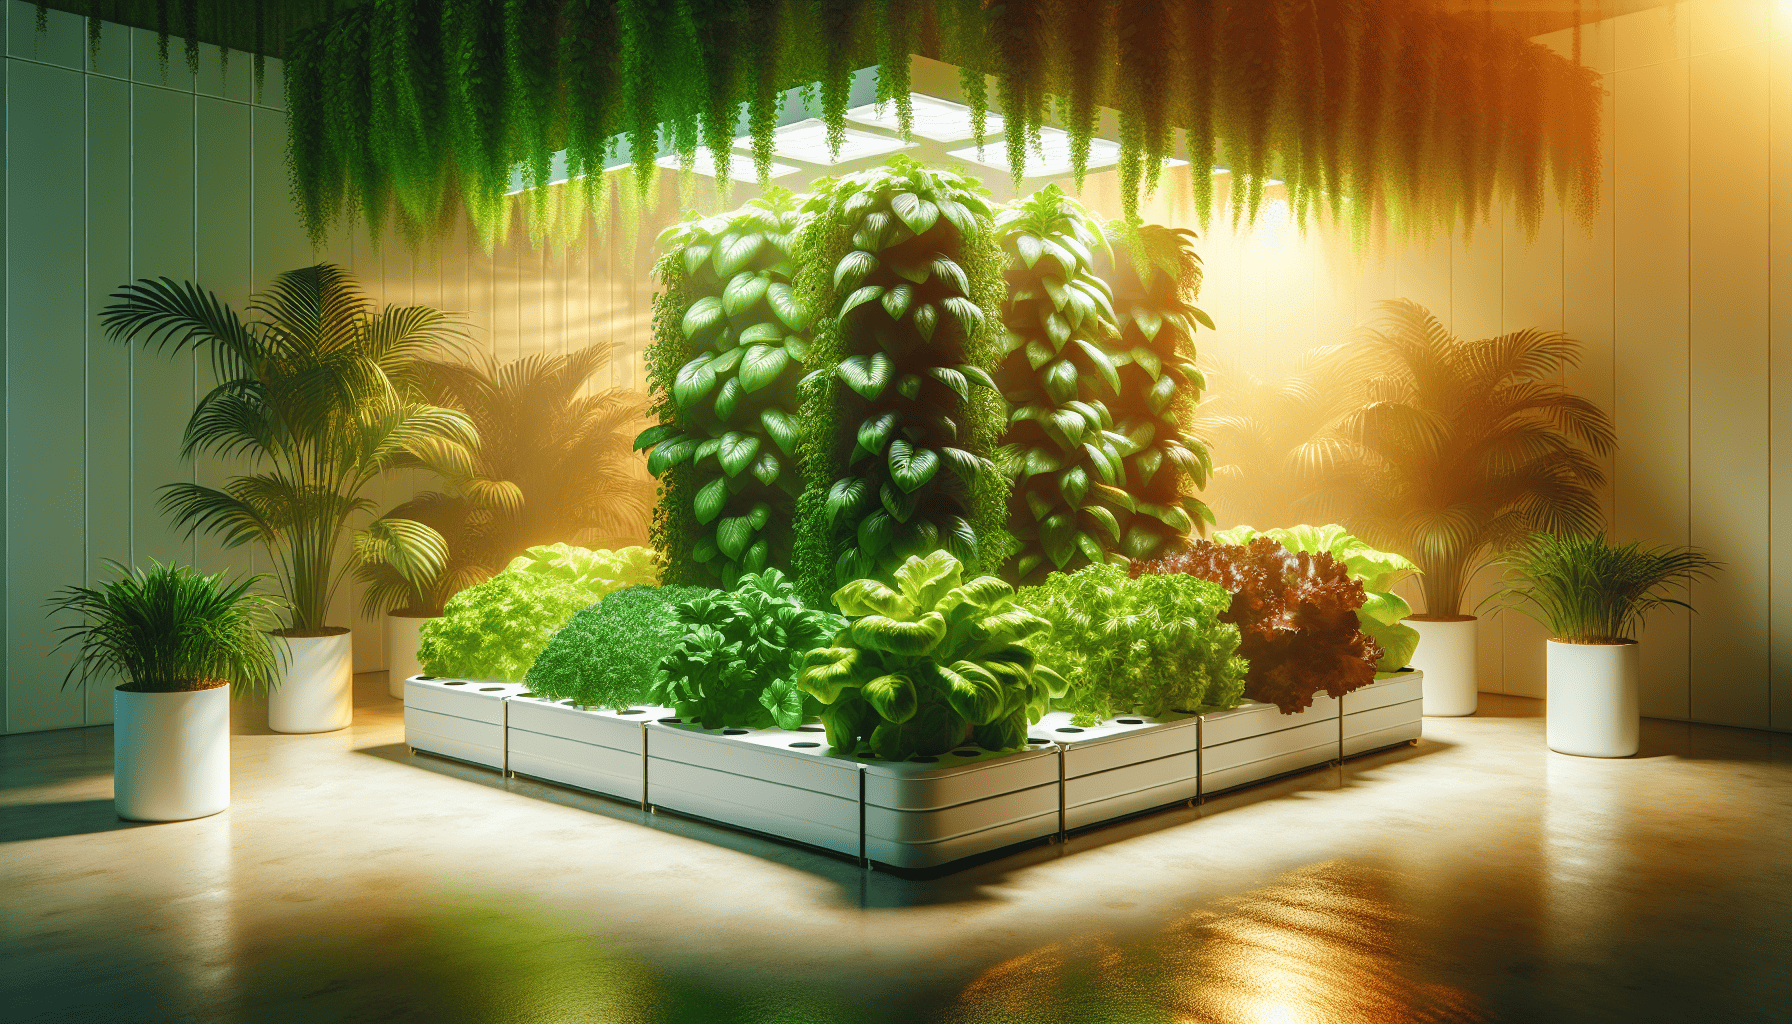 Advantages of hydroponic indoor plants